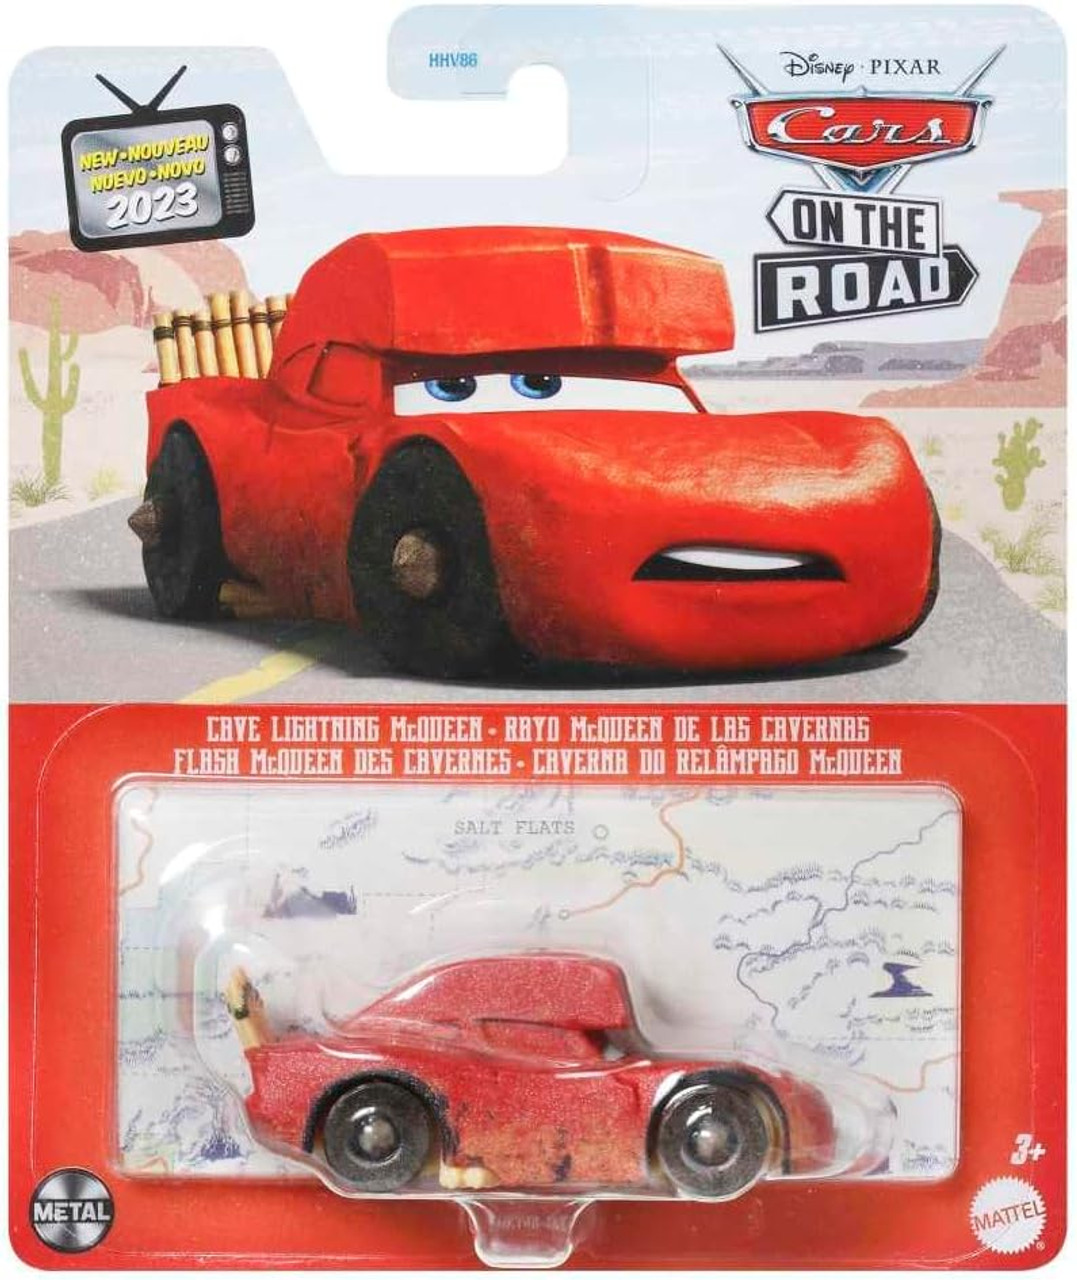 Mattel Disney Cars Toys On The Road Toys,Playset with 2 Toy Cars and  Light-Up Countdown,Features Lightning McQueen and Mater Truck